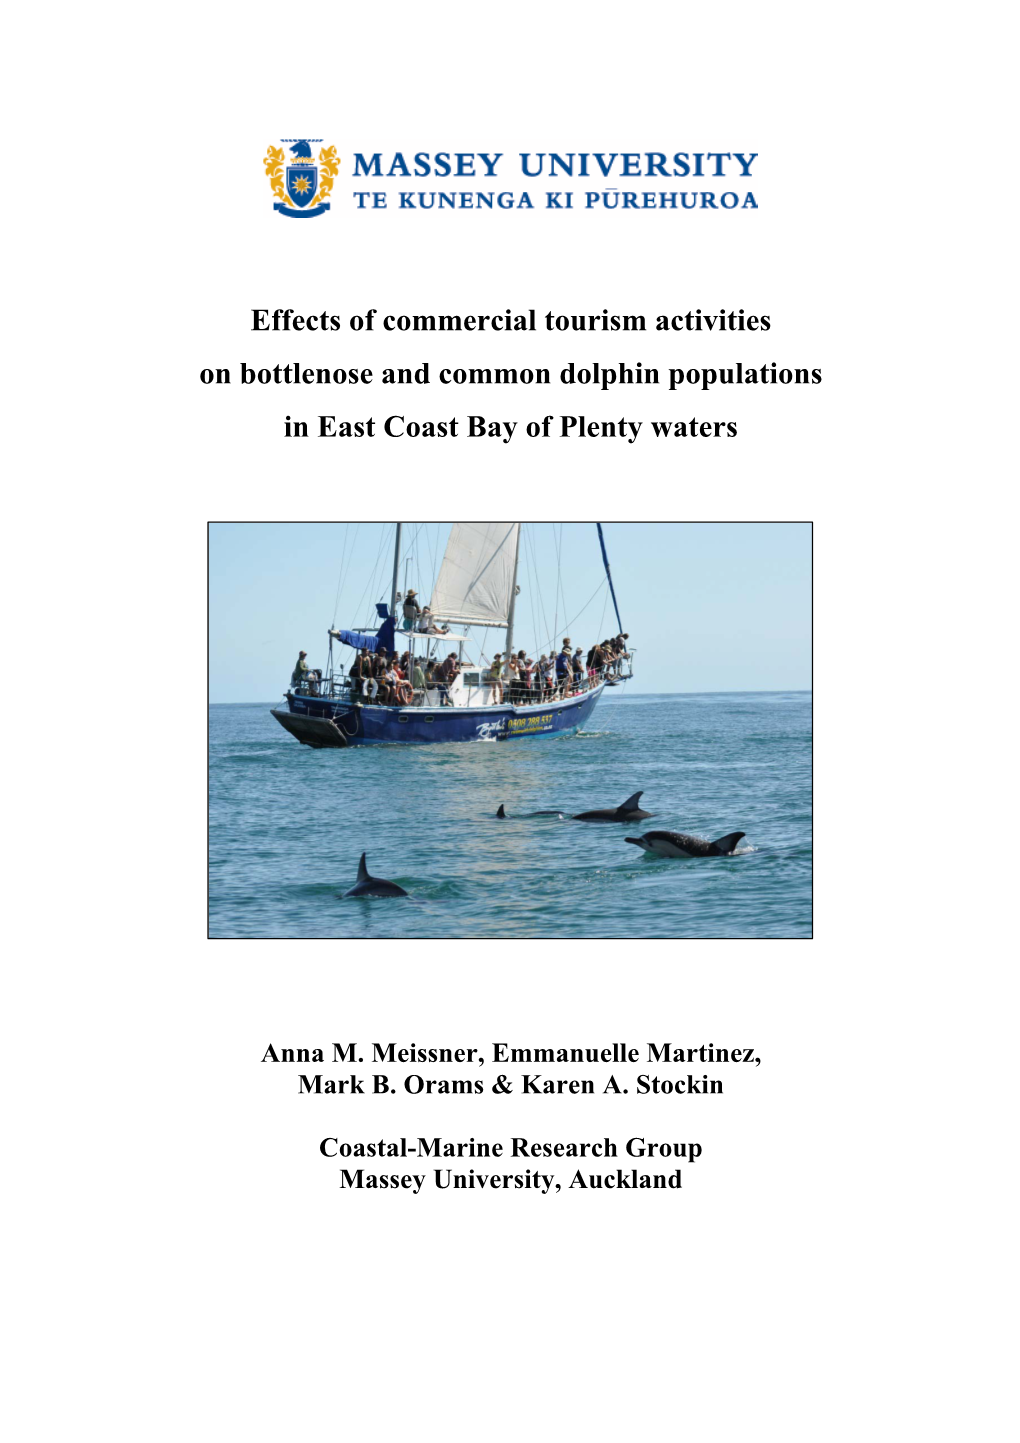 Effects of Commercial Tourism Activities on Bottlenose and Common Dolphin Populations in East Coast Bay of Plenty Waters